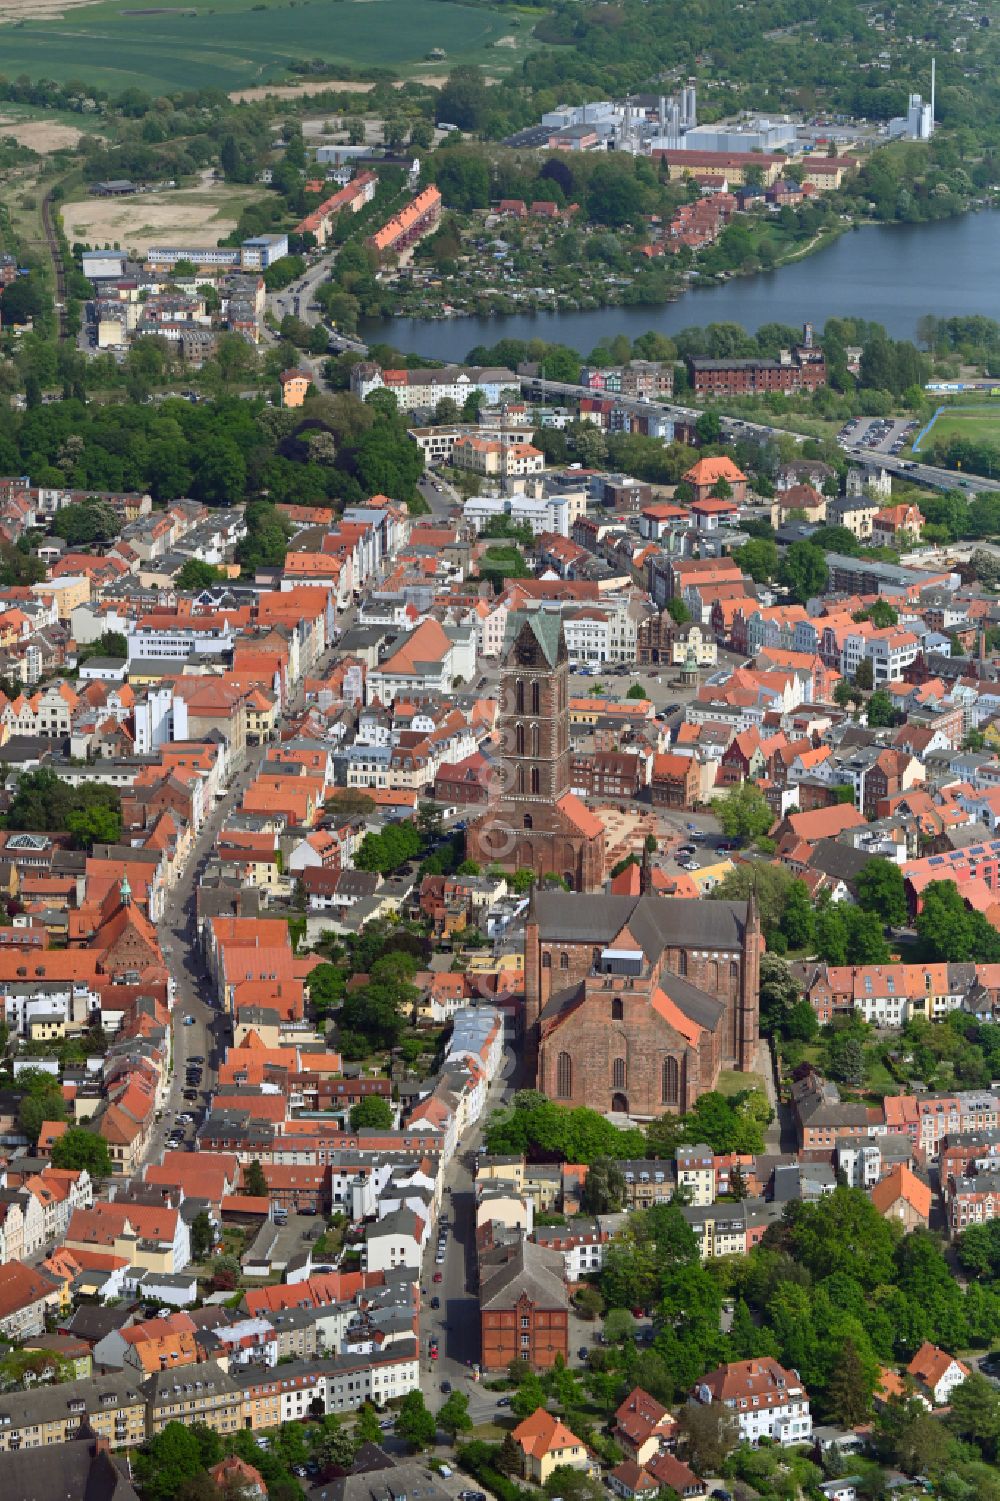 Hansestadt Wismar from above - Old Town area and city center in Wismar in the state Mecklenburg - Western Pomerania